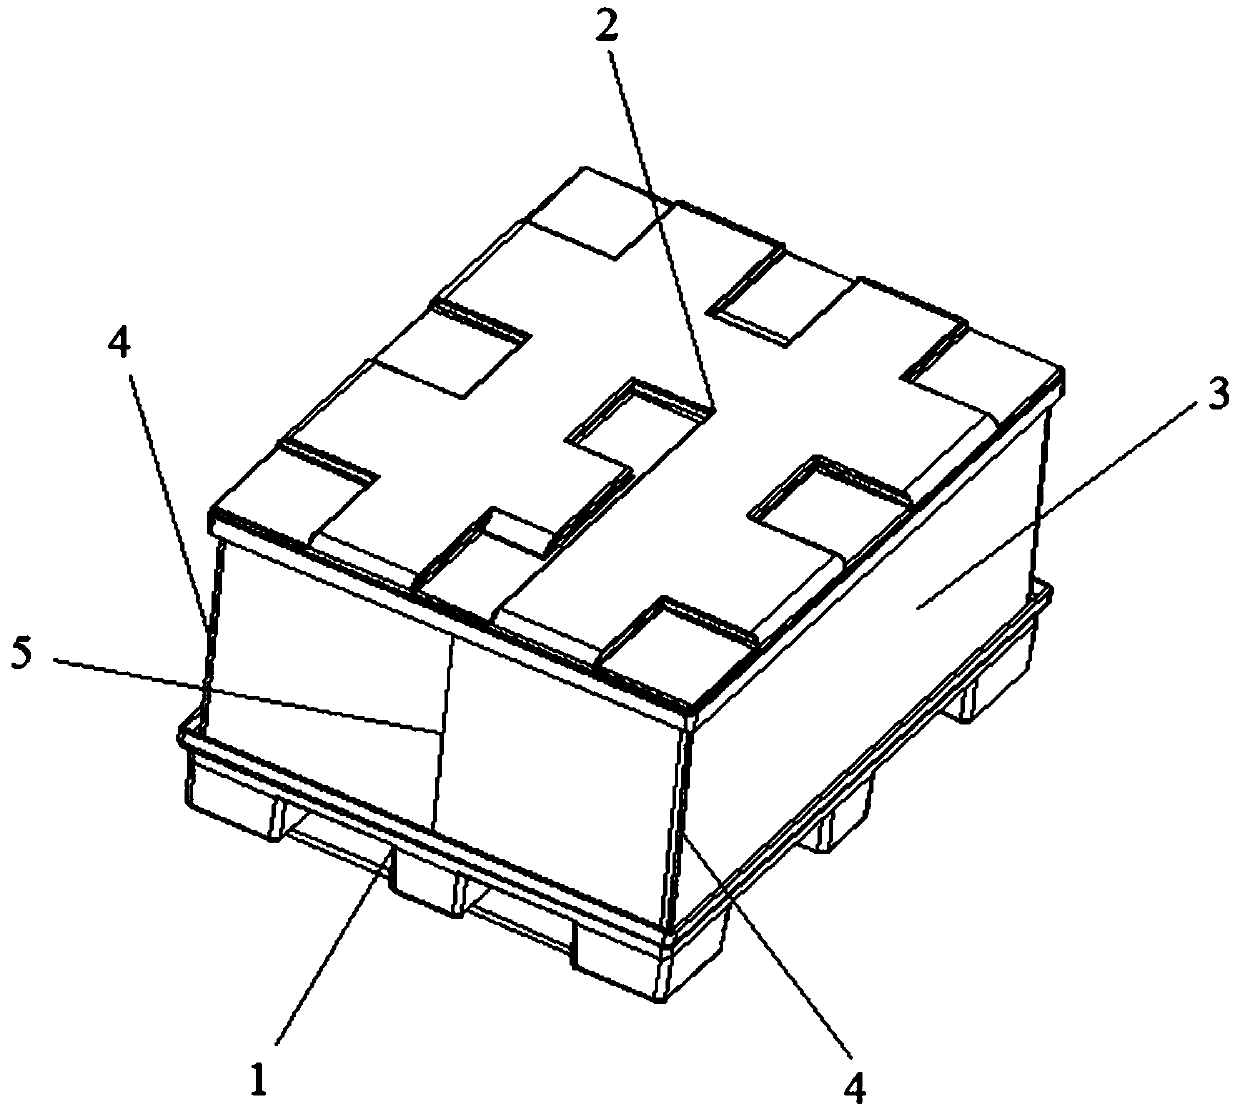 An automatic folding and recycling device for the coaming box of automobile exterior parts